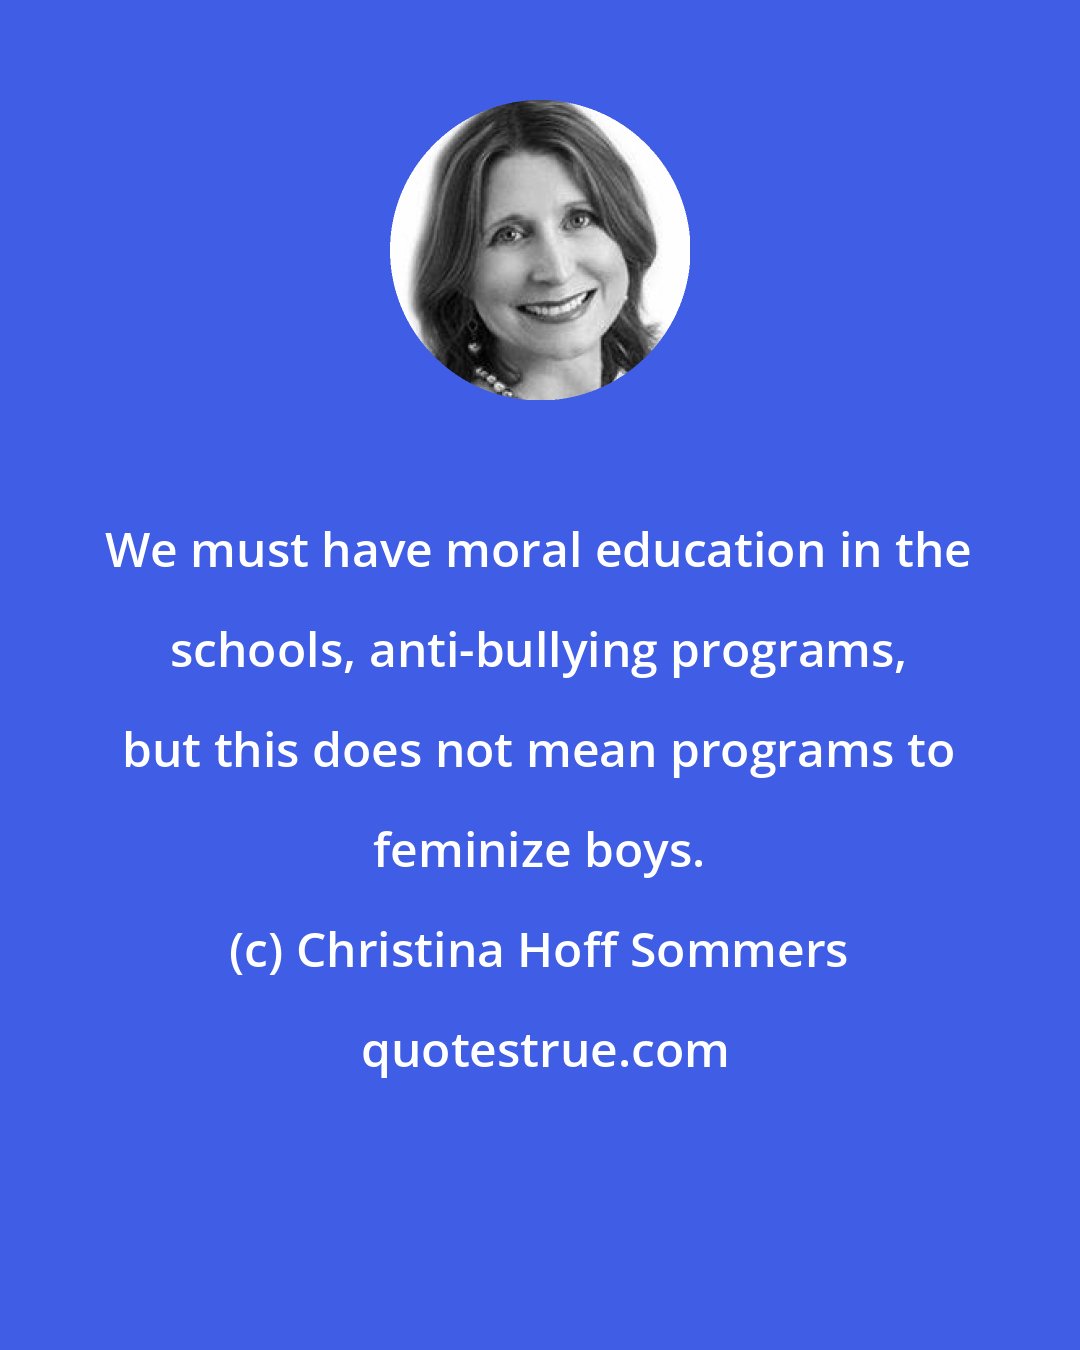 Christina Hoff Sommers: We must have moral education in the schools, anti-bullying programs, but this does not mean programs to feminize boys.